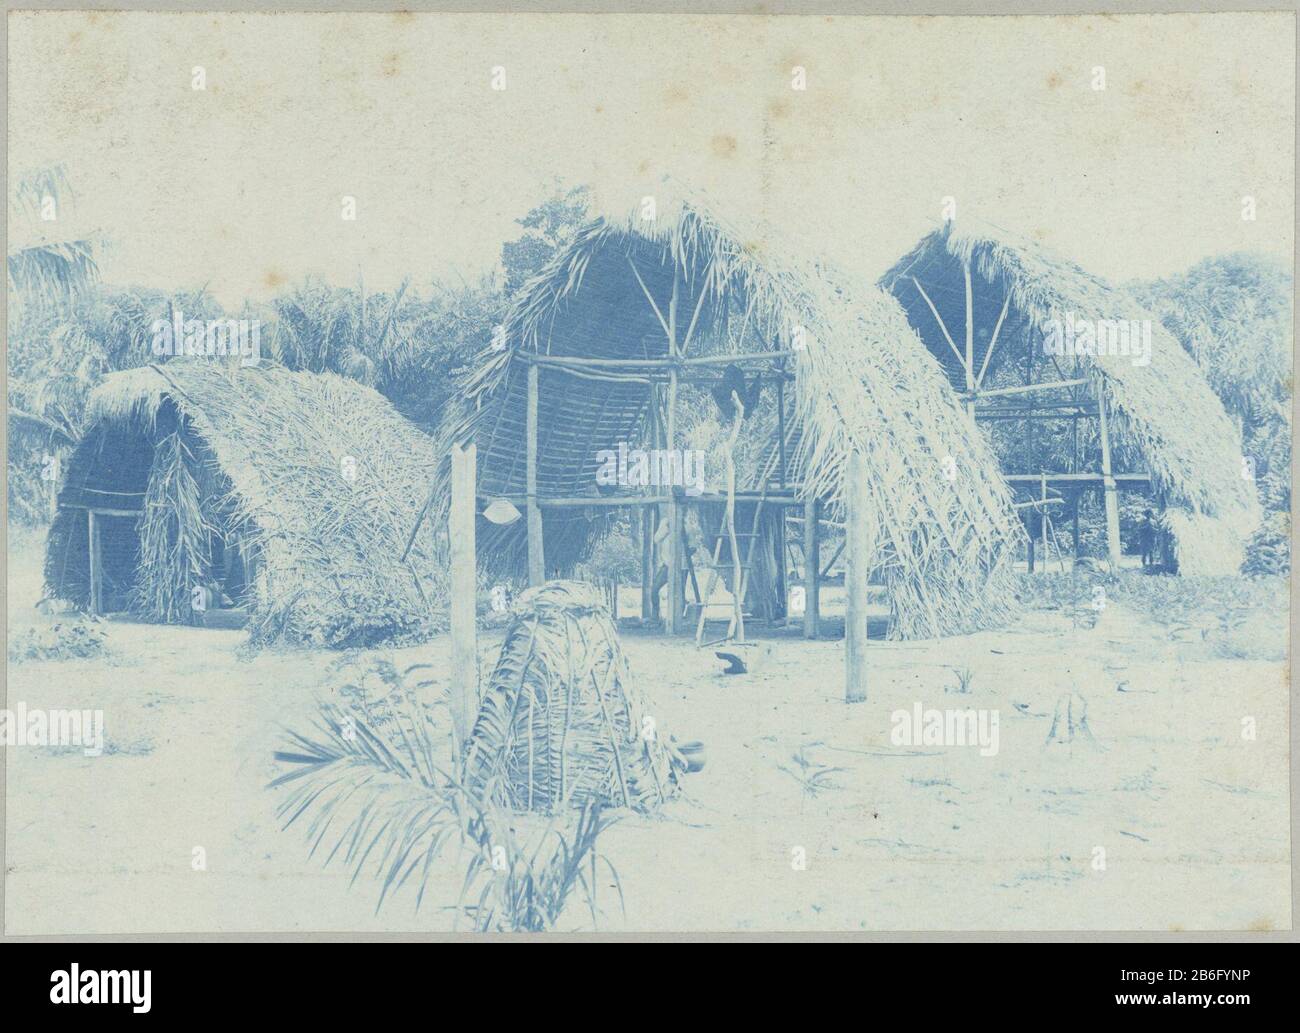 Caribbean Village at the site Galibi in Suriname. Part of the album of the Doijer family, Souvenir de Voyage (Part 1), in and around the plantation Ma Retraite in Suriname during the years 1906-1913. Manufacturer : Photographer: Hendrik Doijer (attributed to) Place manufacture: Suriname Date: 1906 - 1913 Physical features: cyanotypie Material: paper Technique: cyanotypie Dimensions: photo: h 120 mm × W 167 mm Subject: native peoples of South America Indian lodge where: 1906 - 1913 Stock Photo